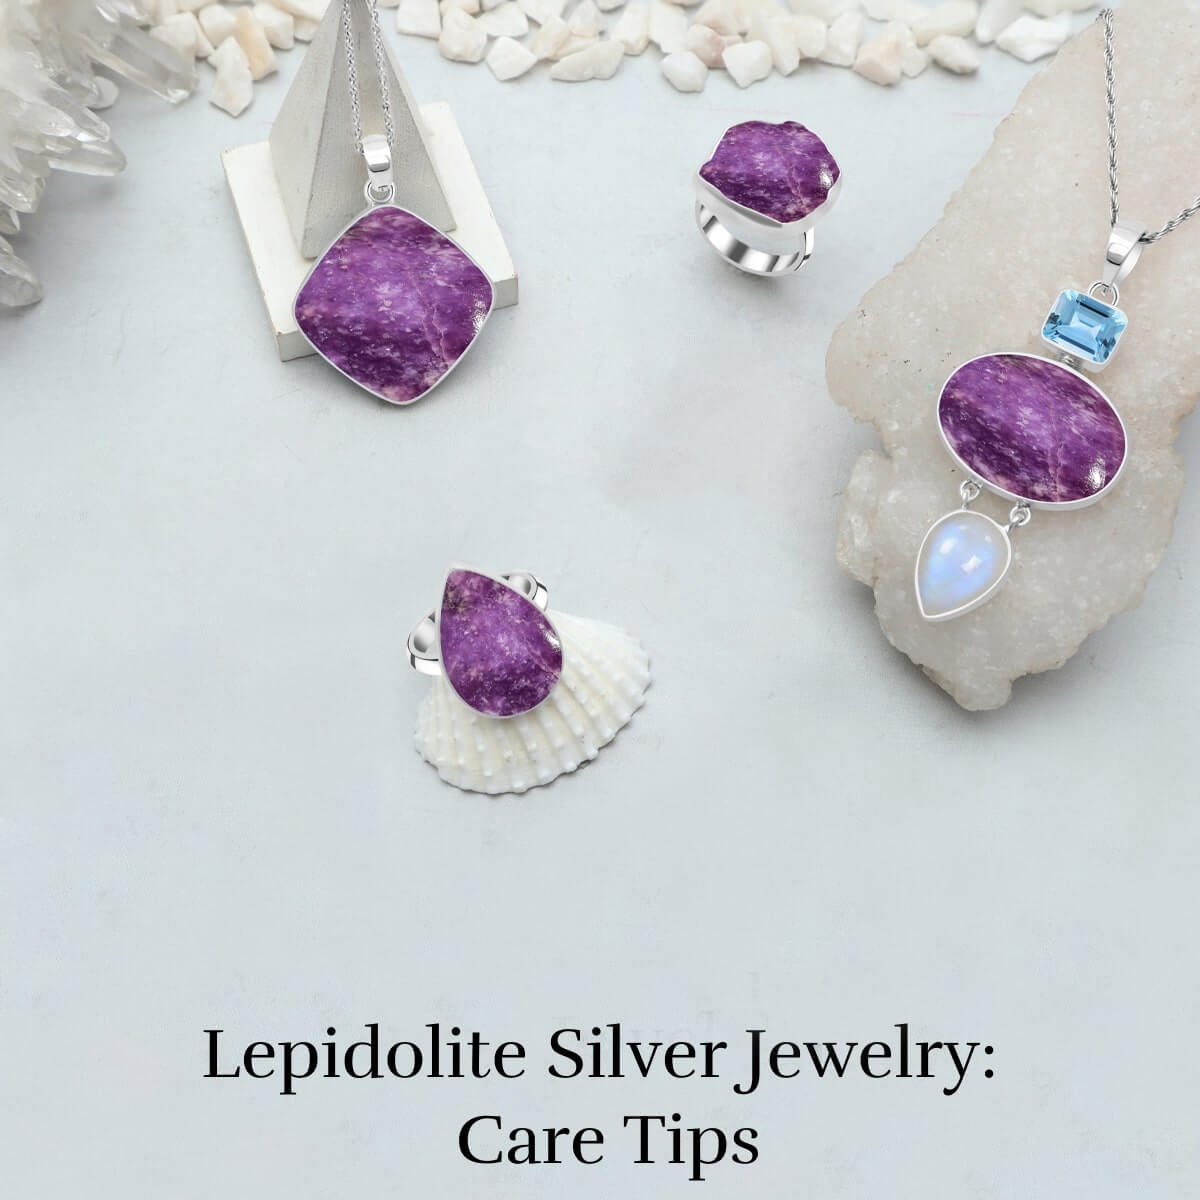 How to Take Care of Your Lepidolite Plain Silver Jewelry